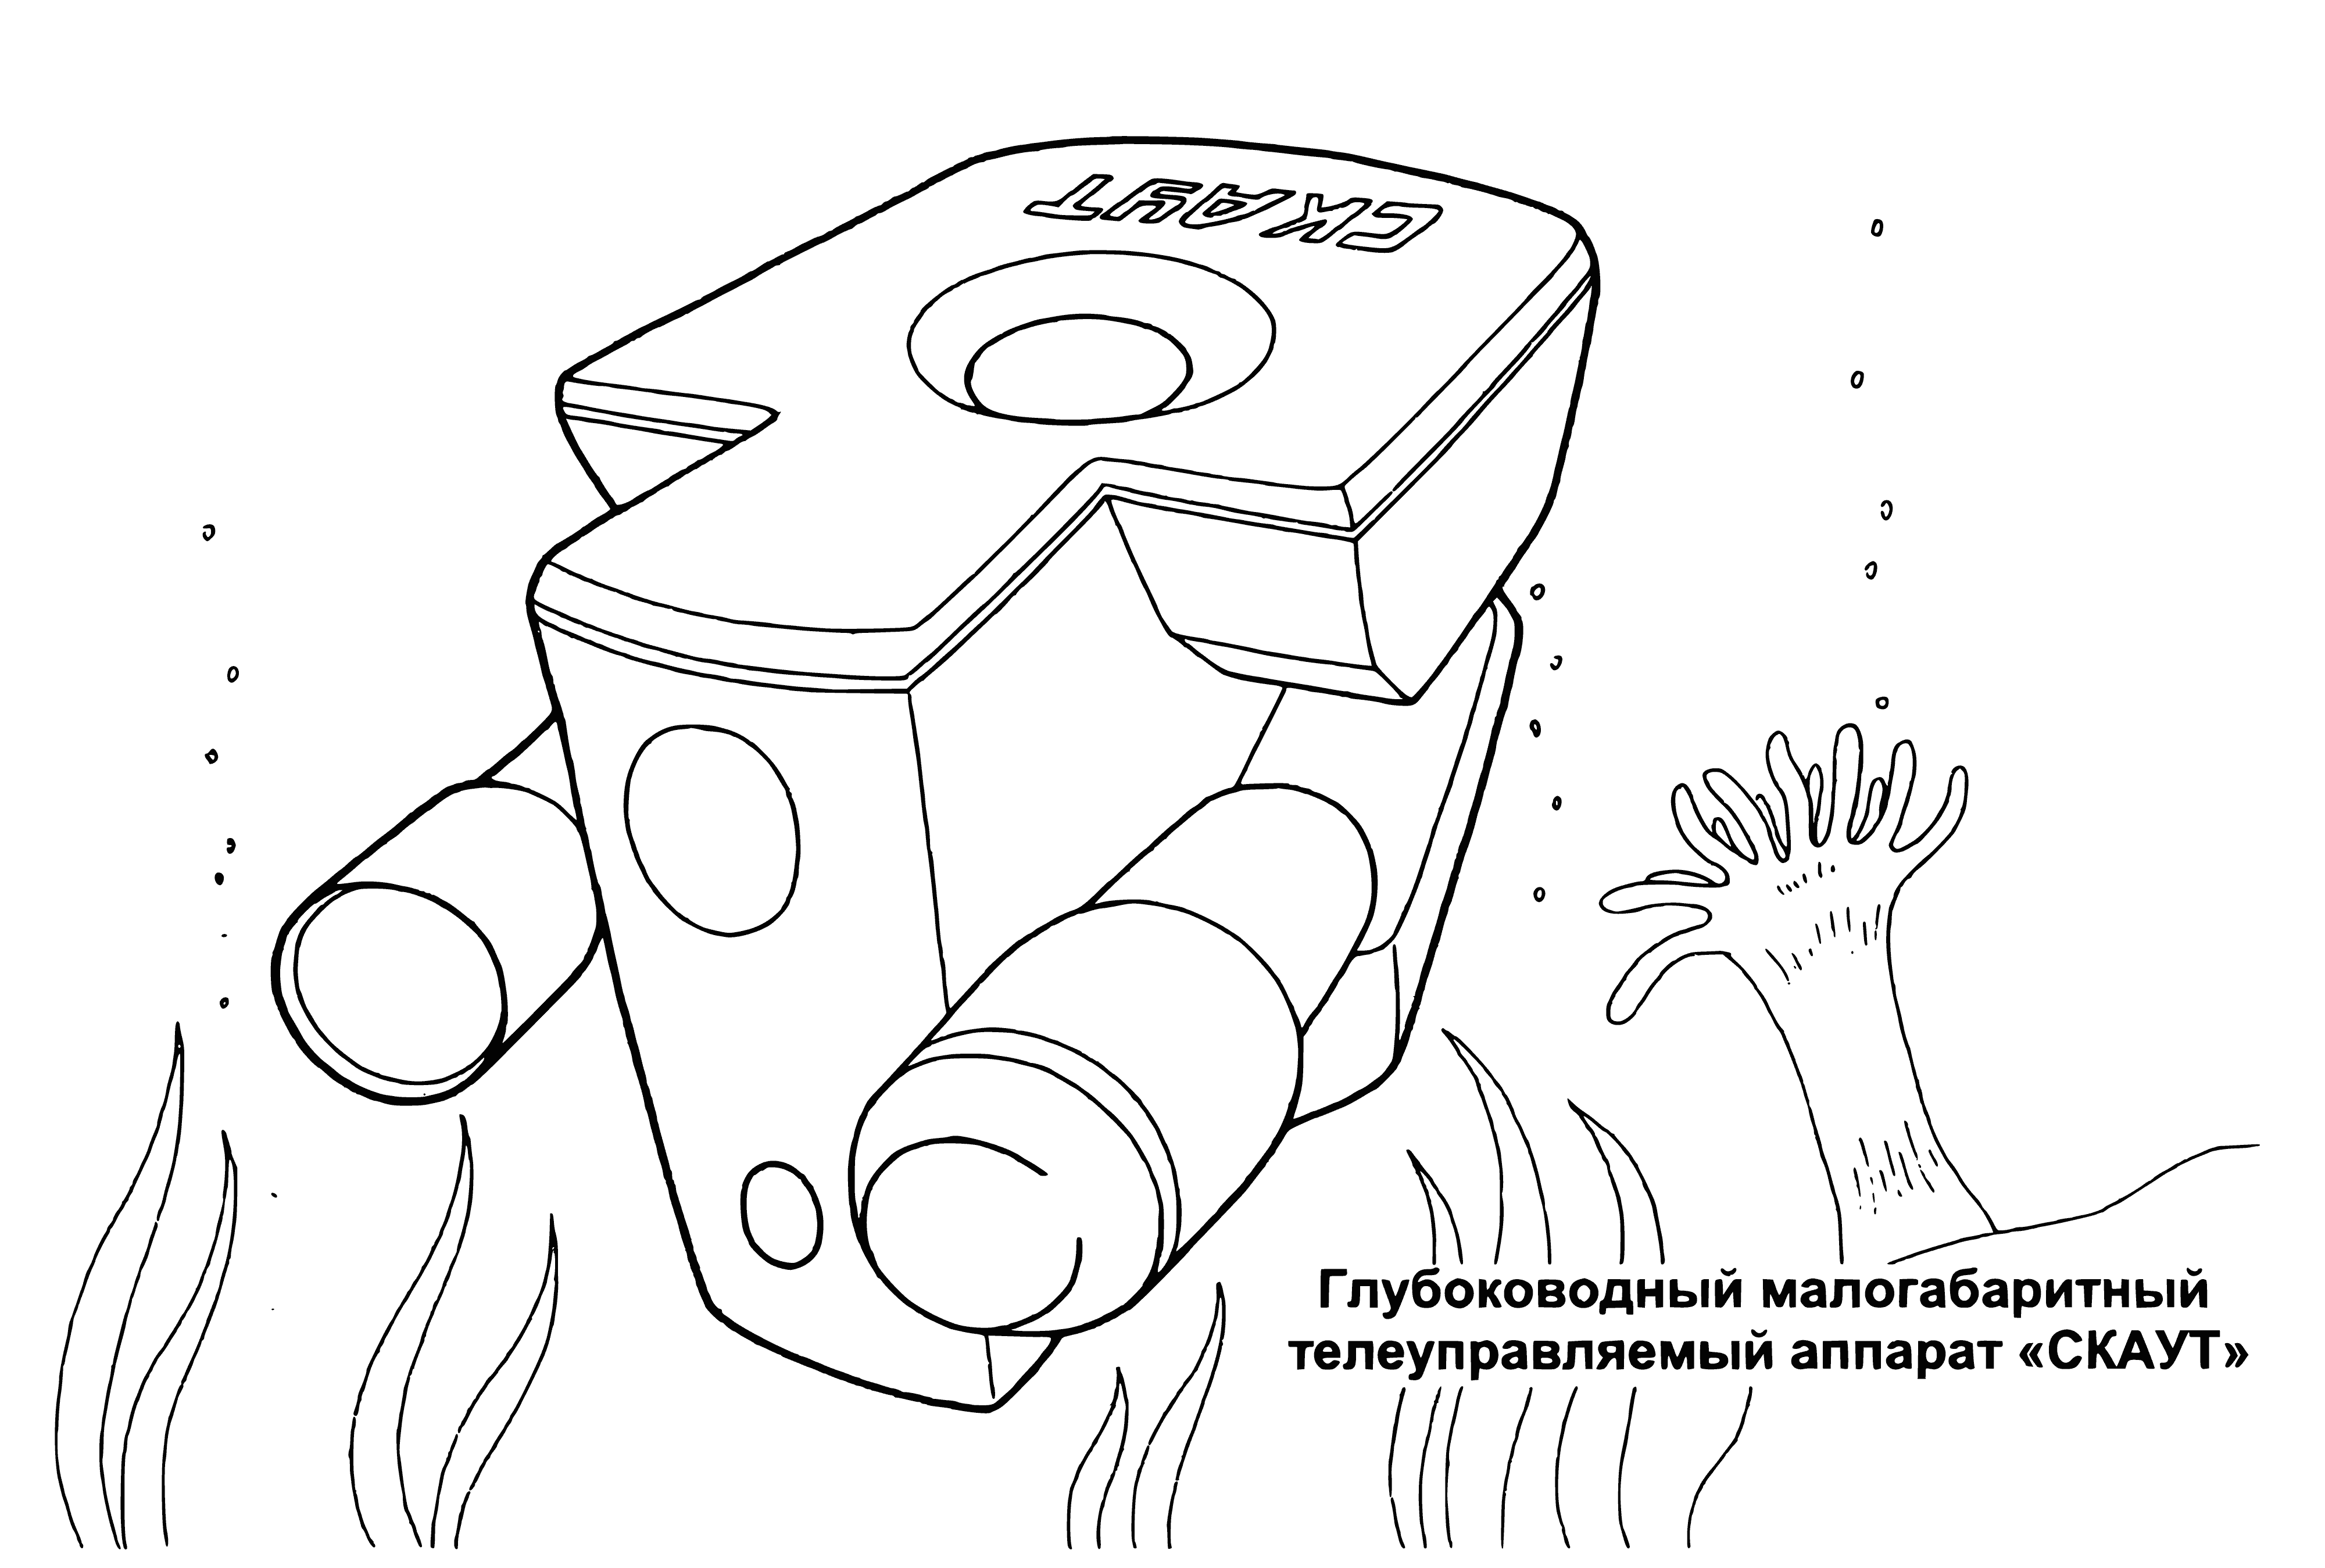 coloring page: Submarine-like vehicles used for research, archaeology, and military applications. Equipped with sonar & robotic arms.